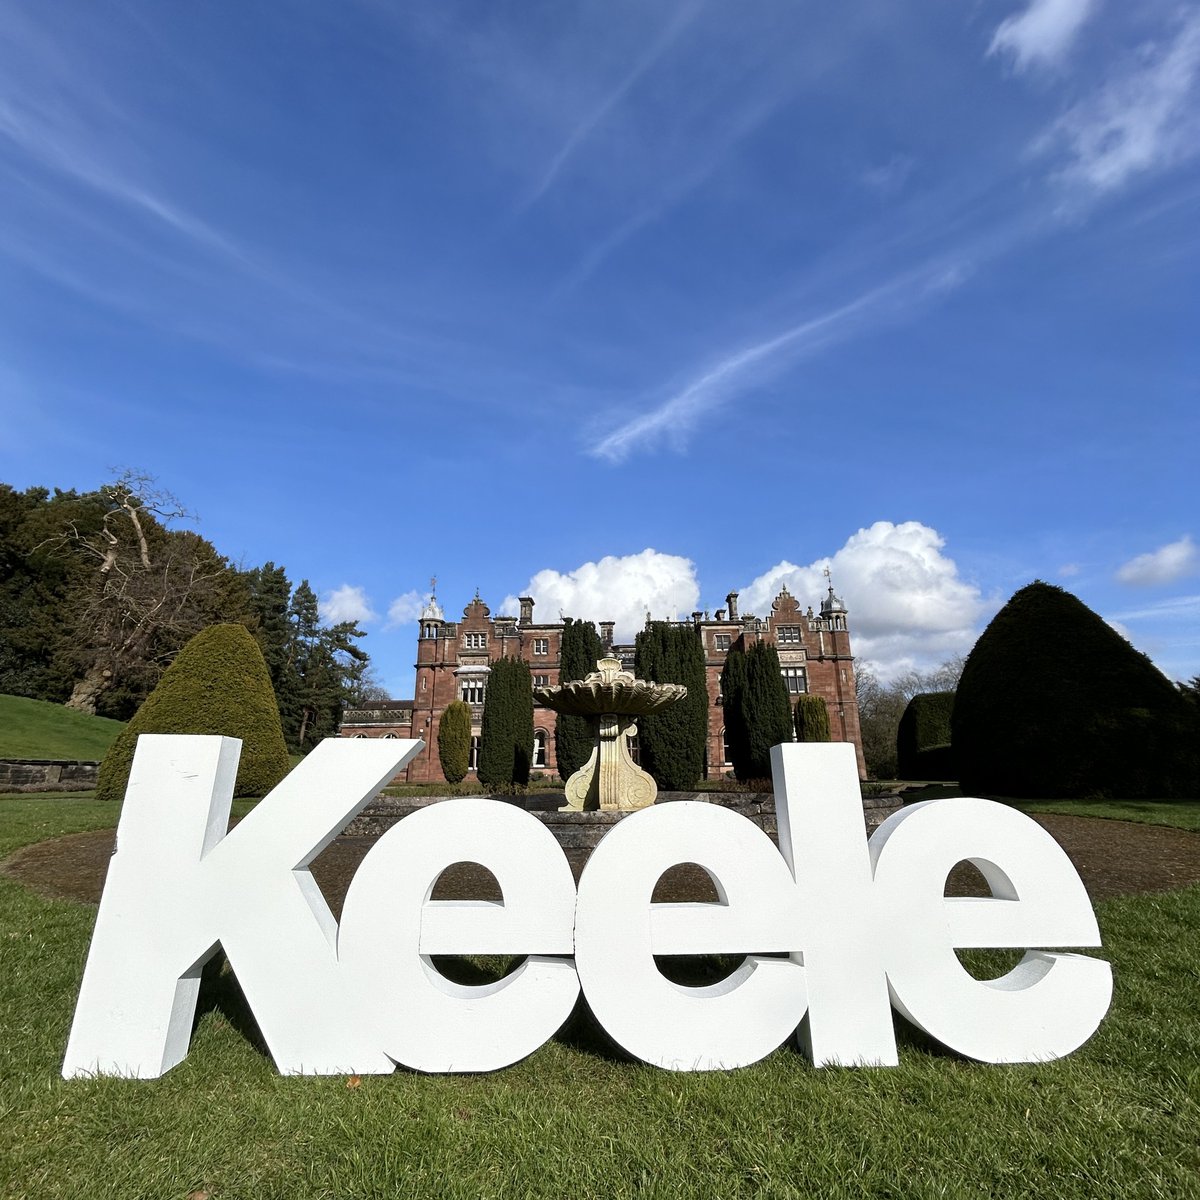 On Saturday 29 June, @KeeleUniversity will hold a free family fun day as part of their 75th anniversary celebrations. Keele Day 2024 will feature activities, workshops, live music, talks, arts and crafts, sporting showcases, and a RAF flyby. More: tinyurl.com/4ay4dcpc